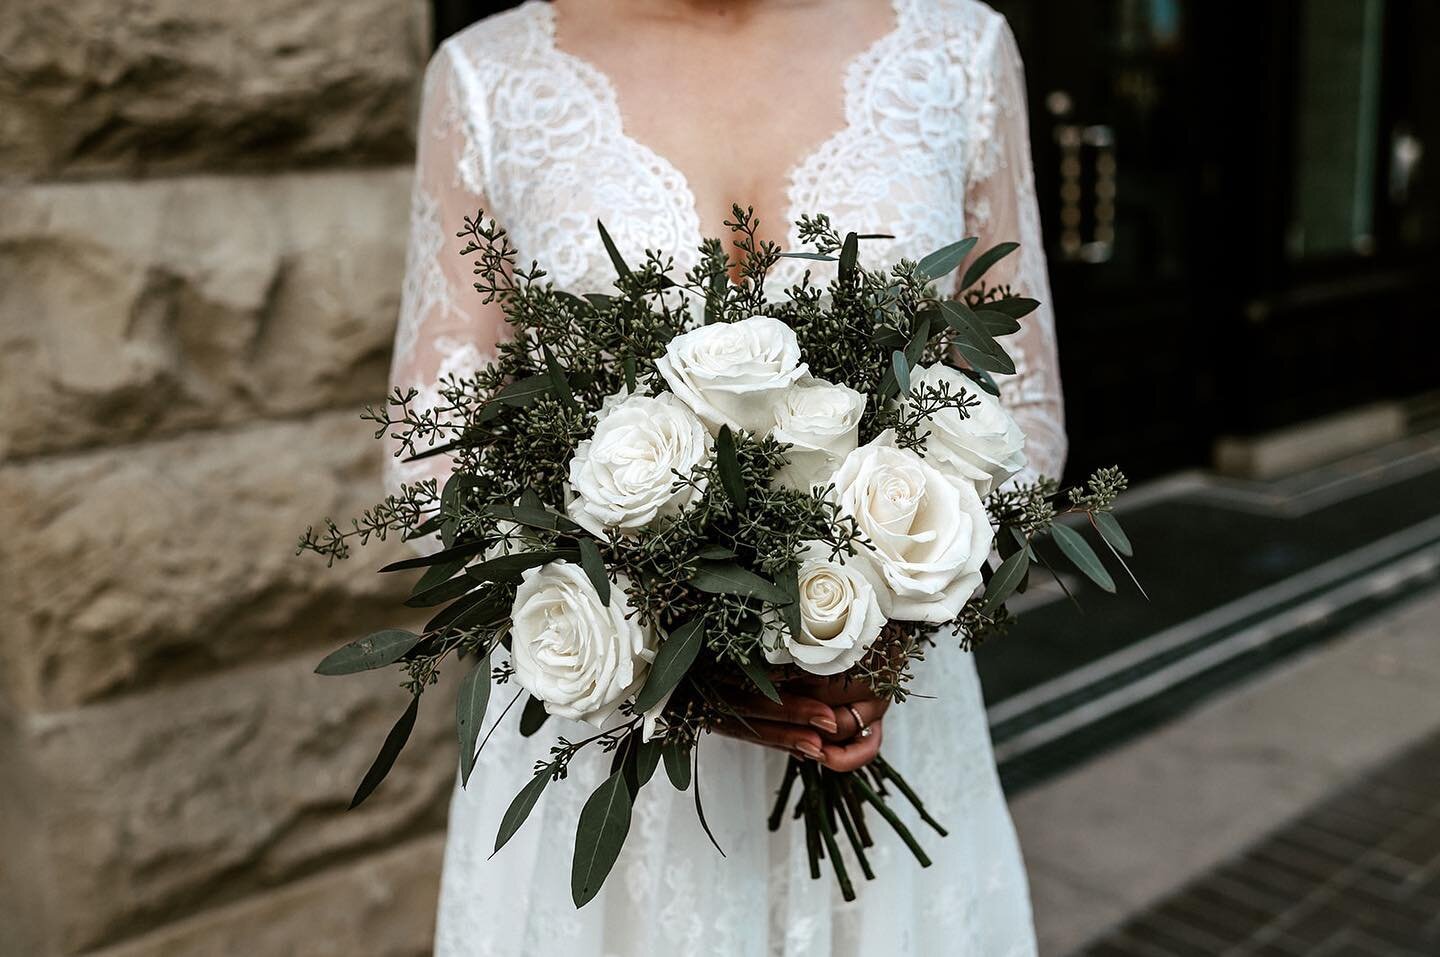 ᴄʟᴀssɪᴄ💫

When it comes to bridal bouquets, are you team monochromatic or exuberantly colourful? Deep, moody greenery or close to none at all? Full and abundant or dainty and airy? Here&rsquo;s the truth: ᴡᴇ&rsquo;ʀᴇ ғᴀɴs ᴏғ ɪᴛ 𝔸𝕃𝕃. No matter whi